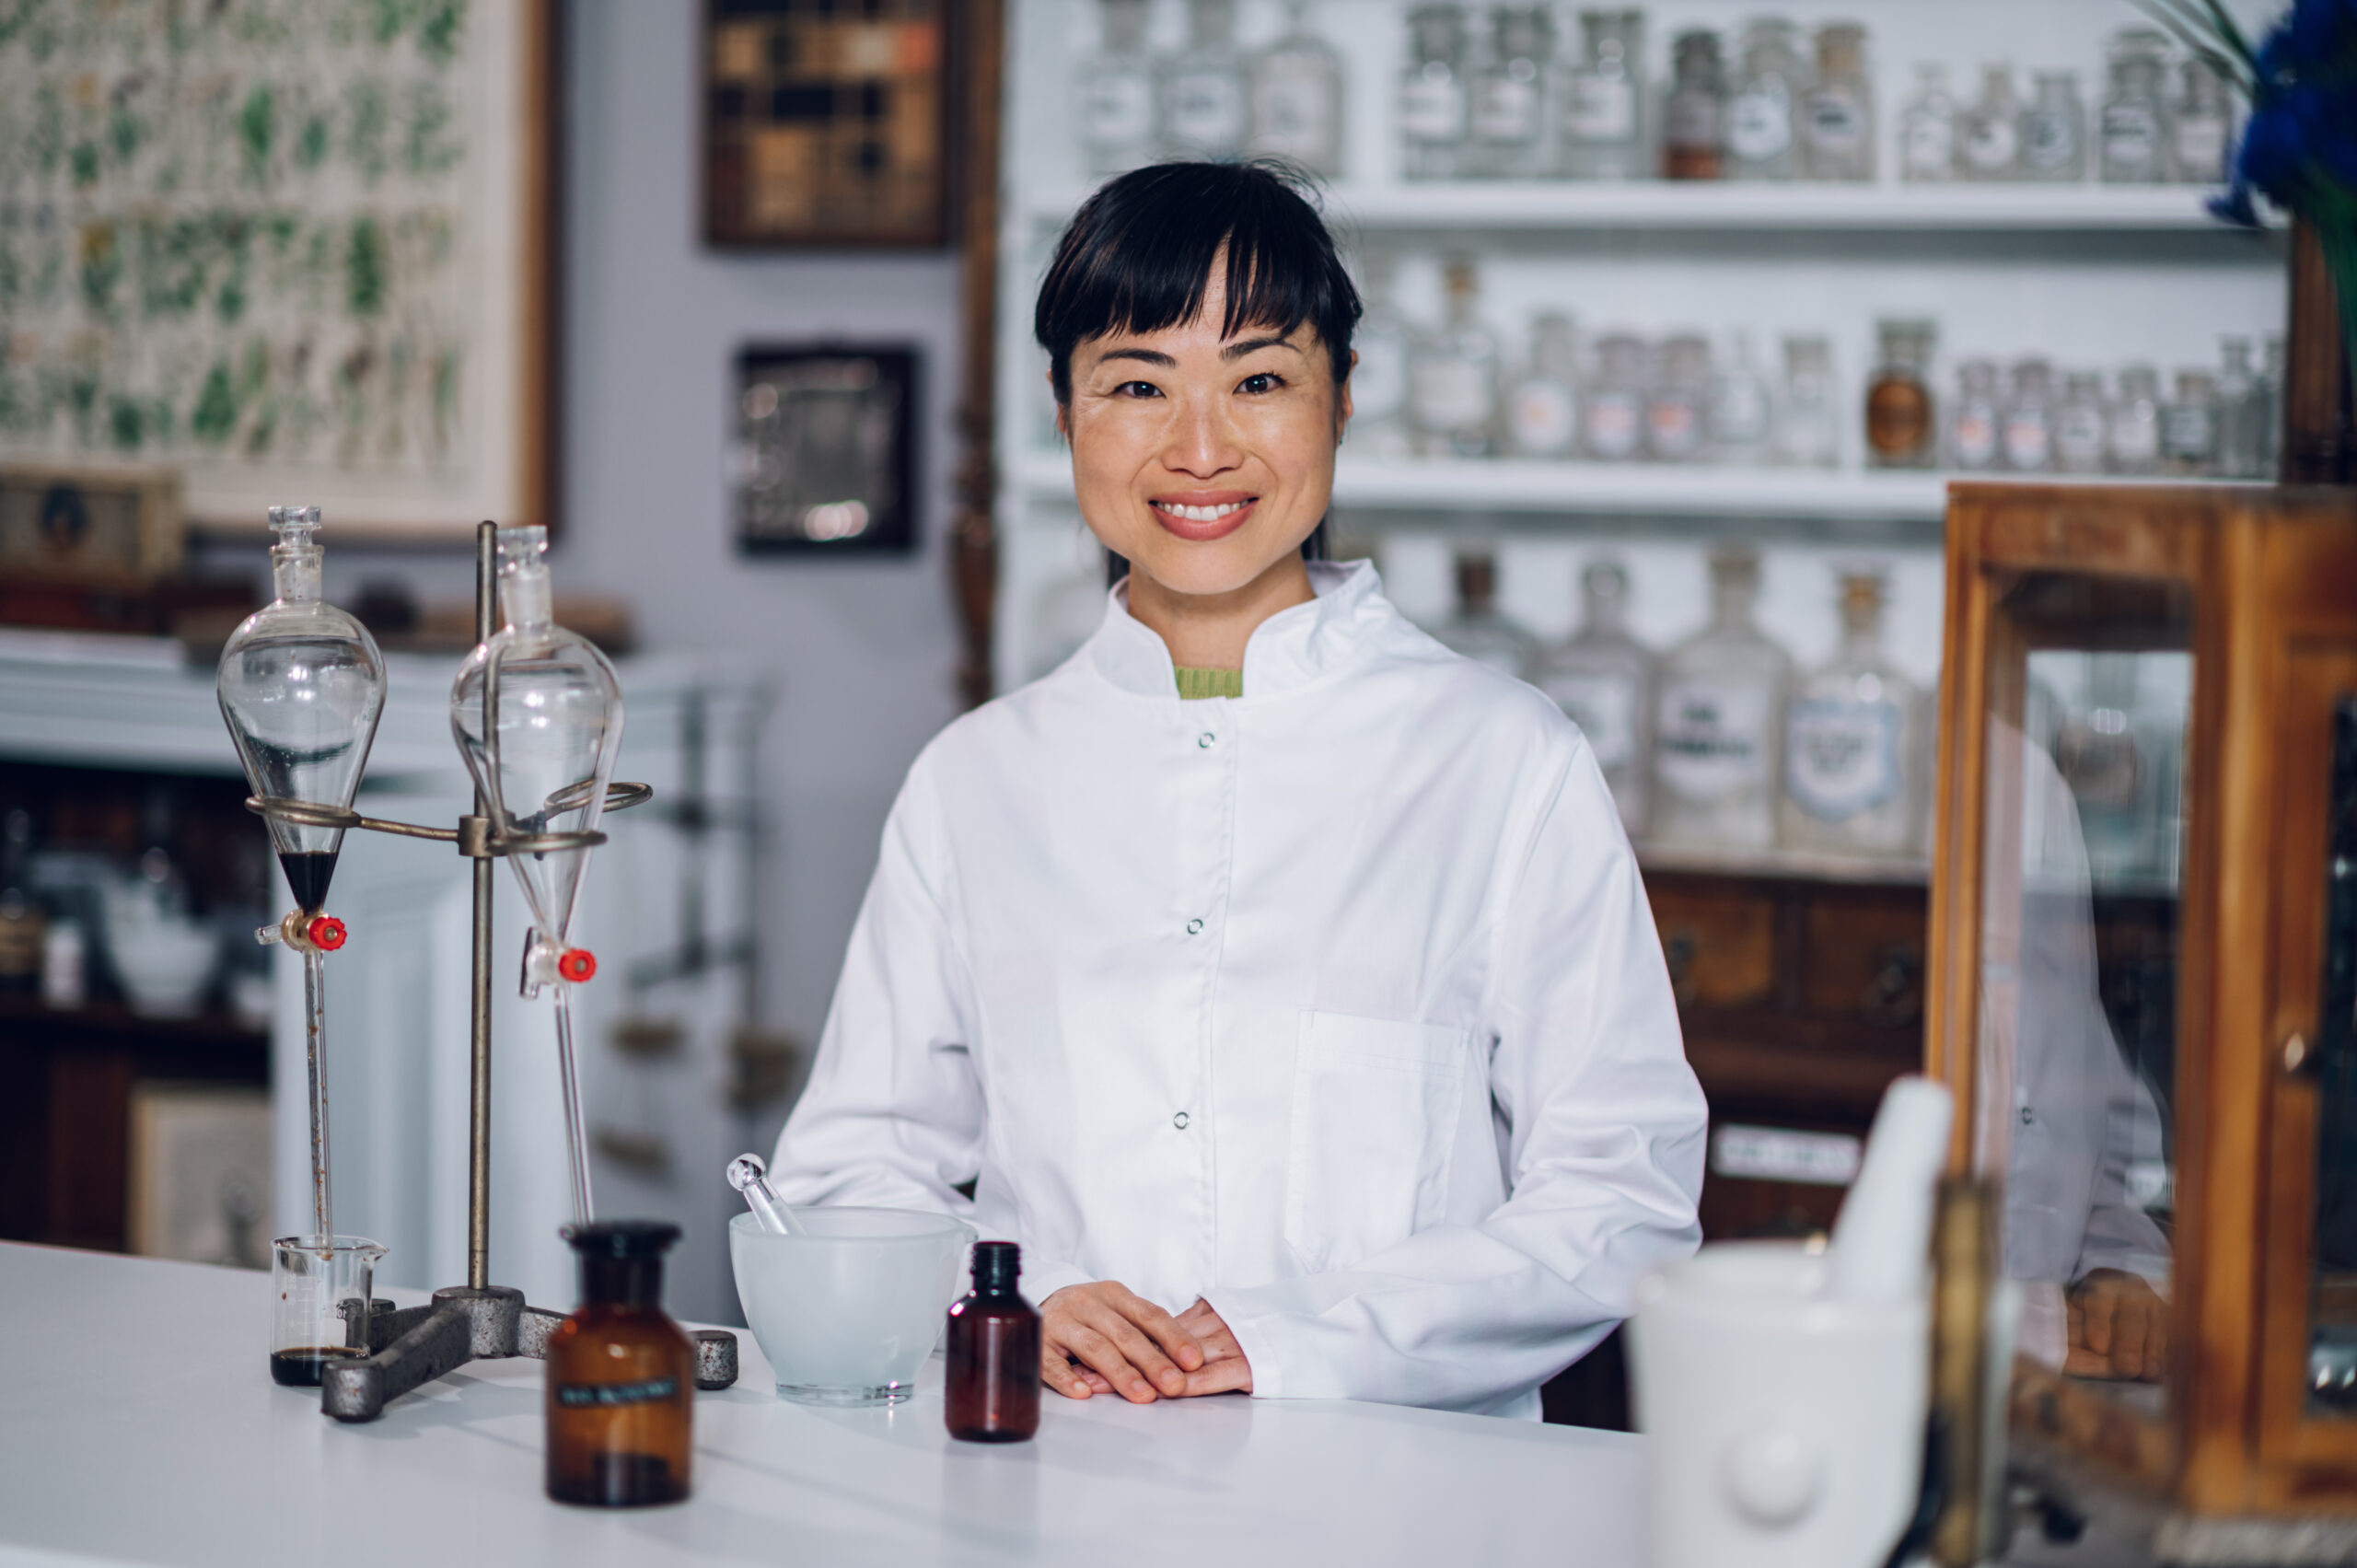 Portrait of a Japanese pharmacist in a lab coat standing with glass vessels and laboratory equipment and smiling at the camera. A happy technician is posing in a drugstore.